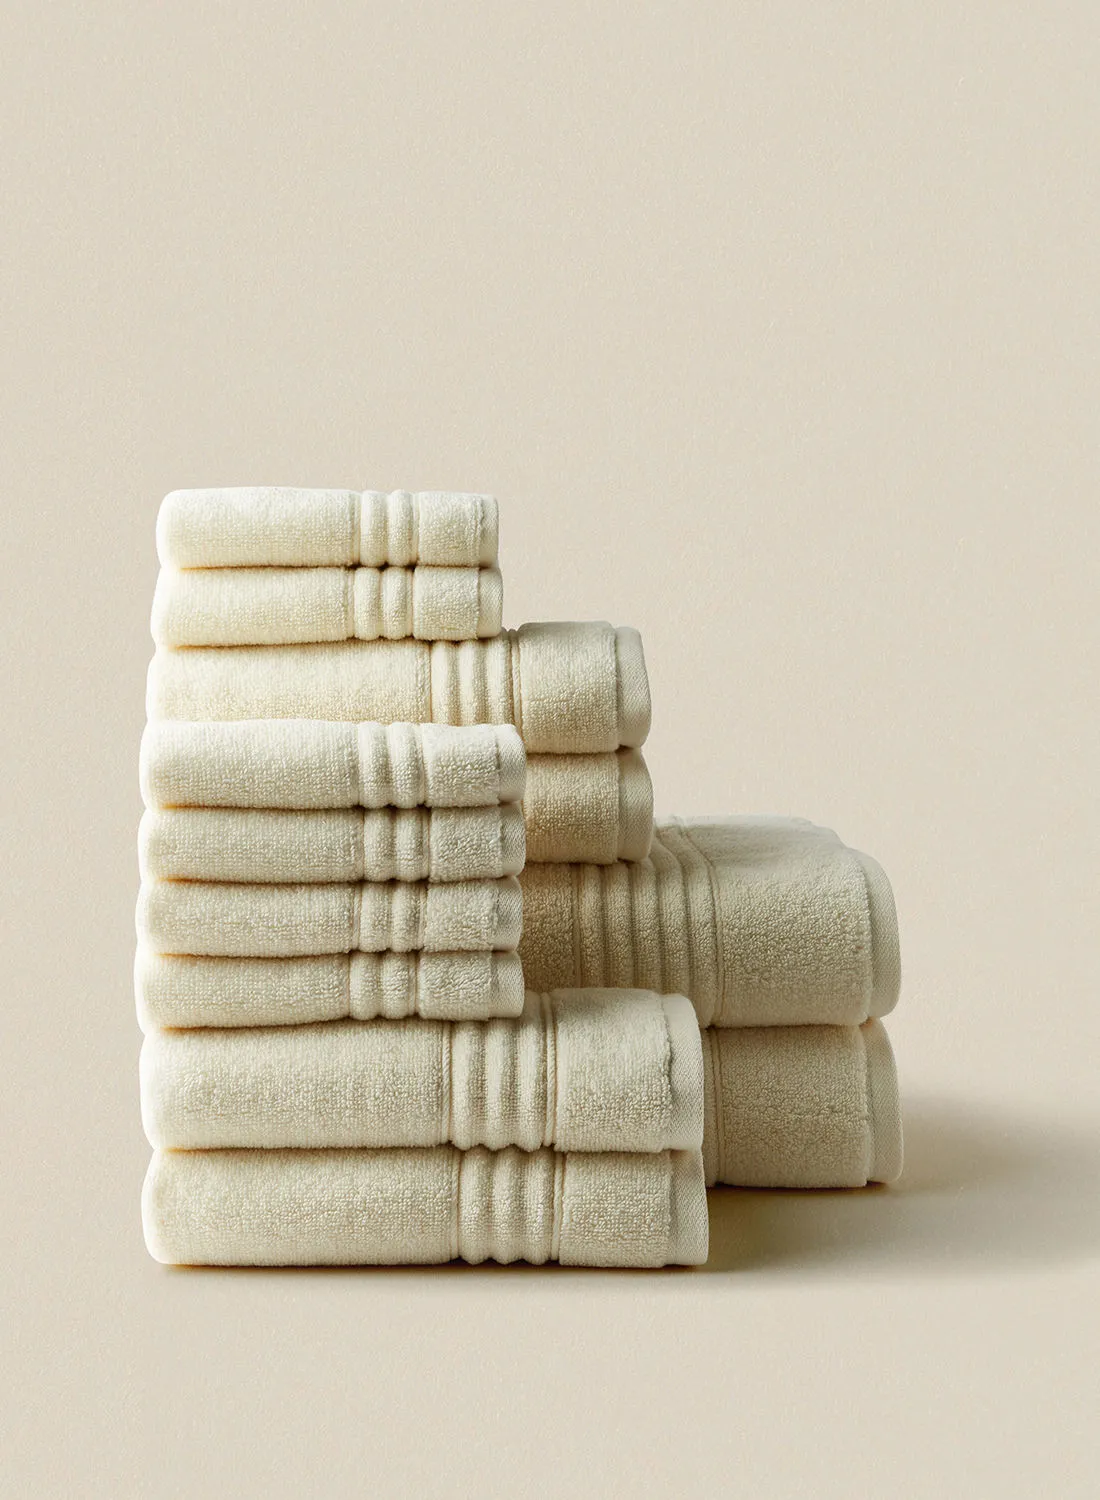 noon east 12 Piece Bathroom Towel Set - 500 GSM 100% Cotton - 4 Hand Towel - 6 Face Towel - 2 Bath Towel - Ivory Color - Highly Absorbent - Fast Dry